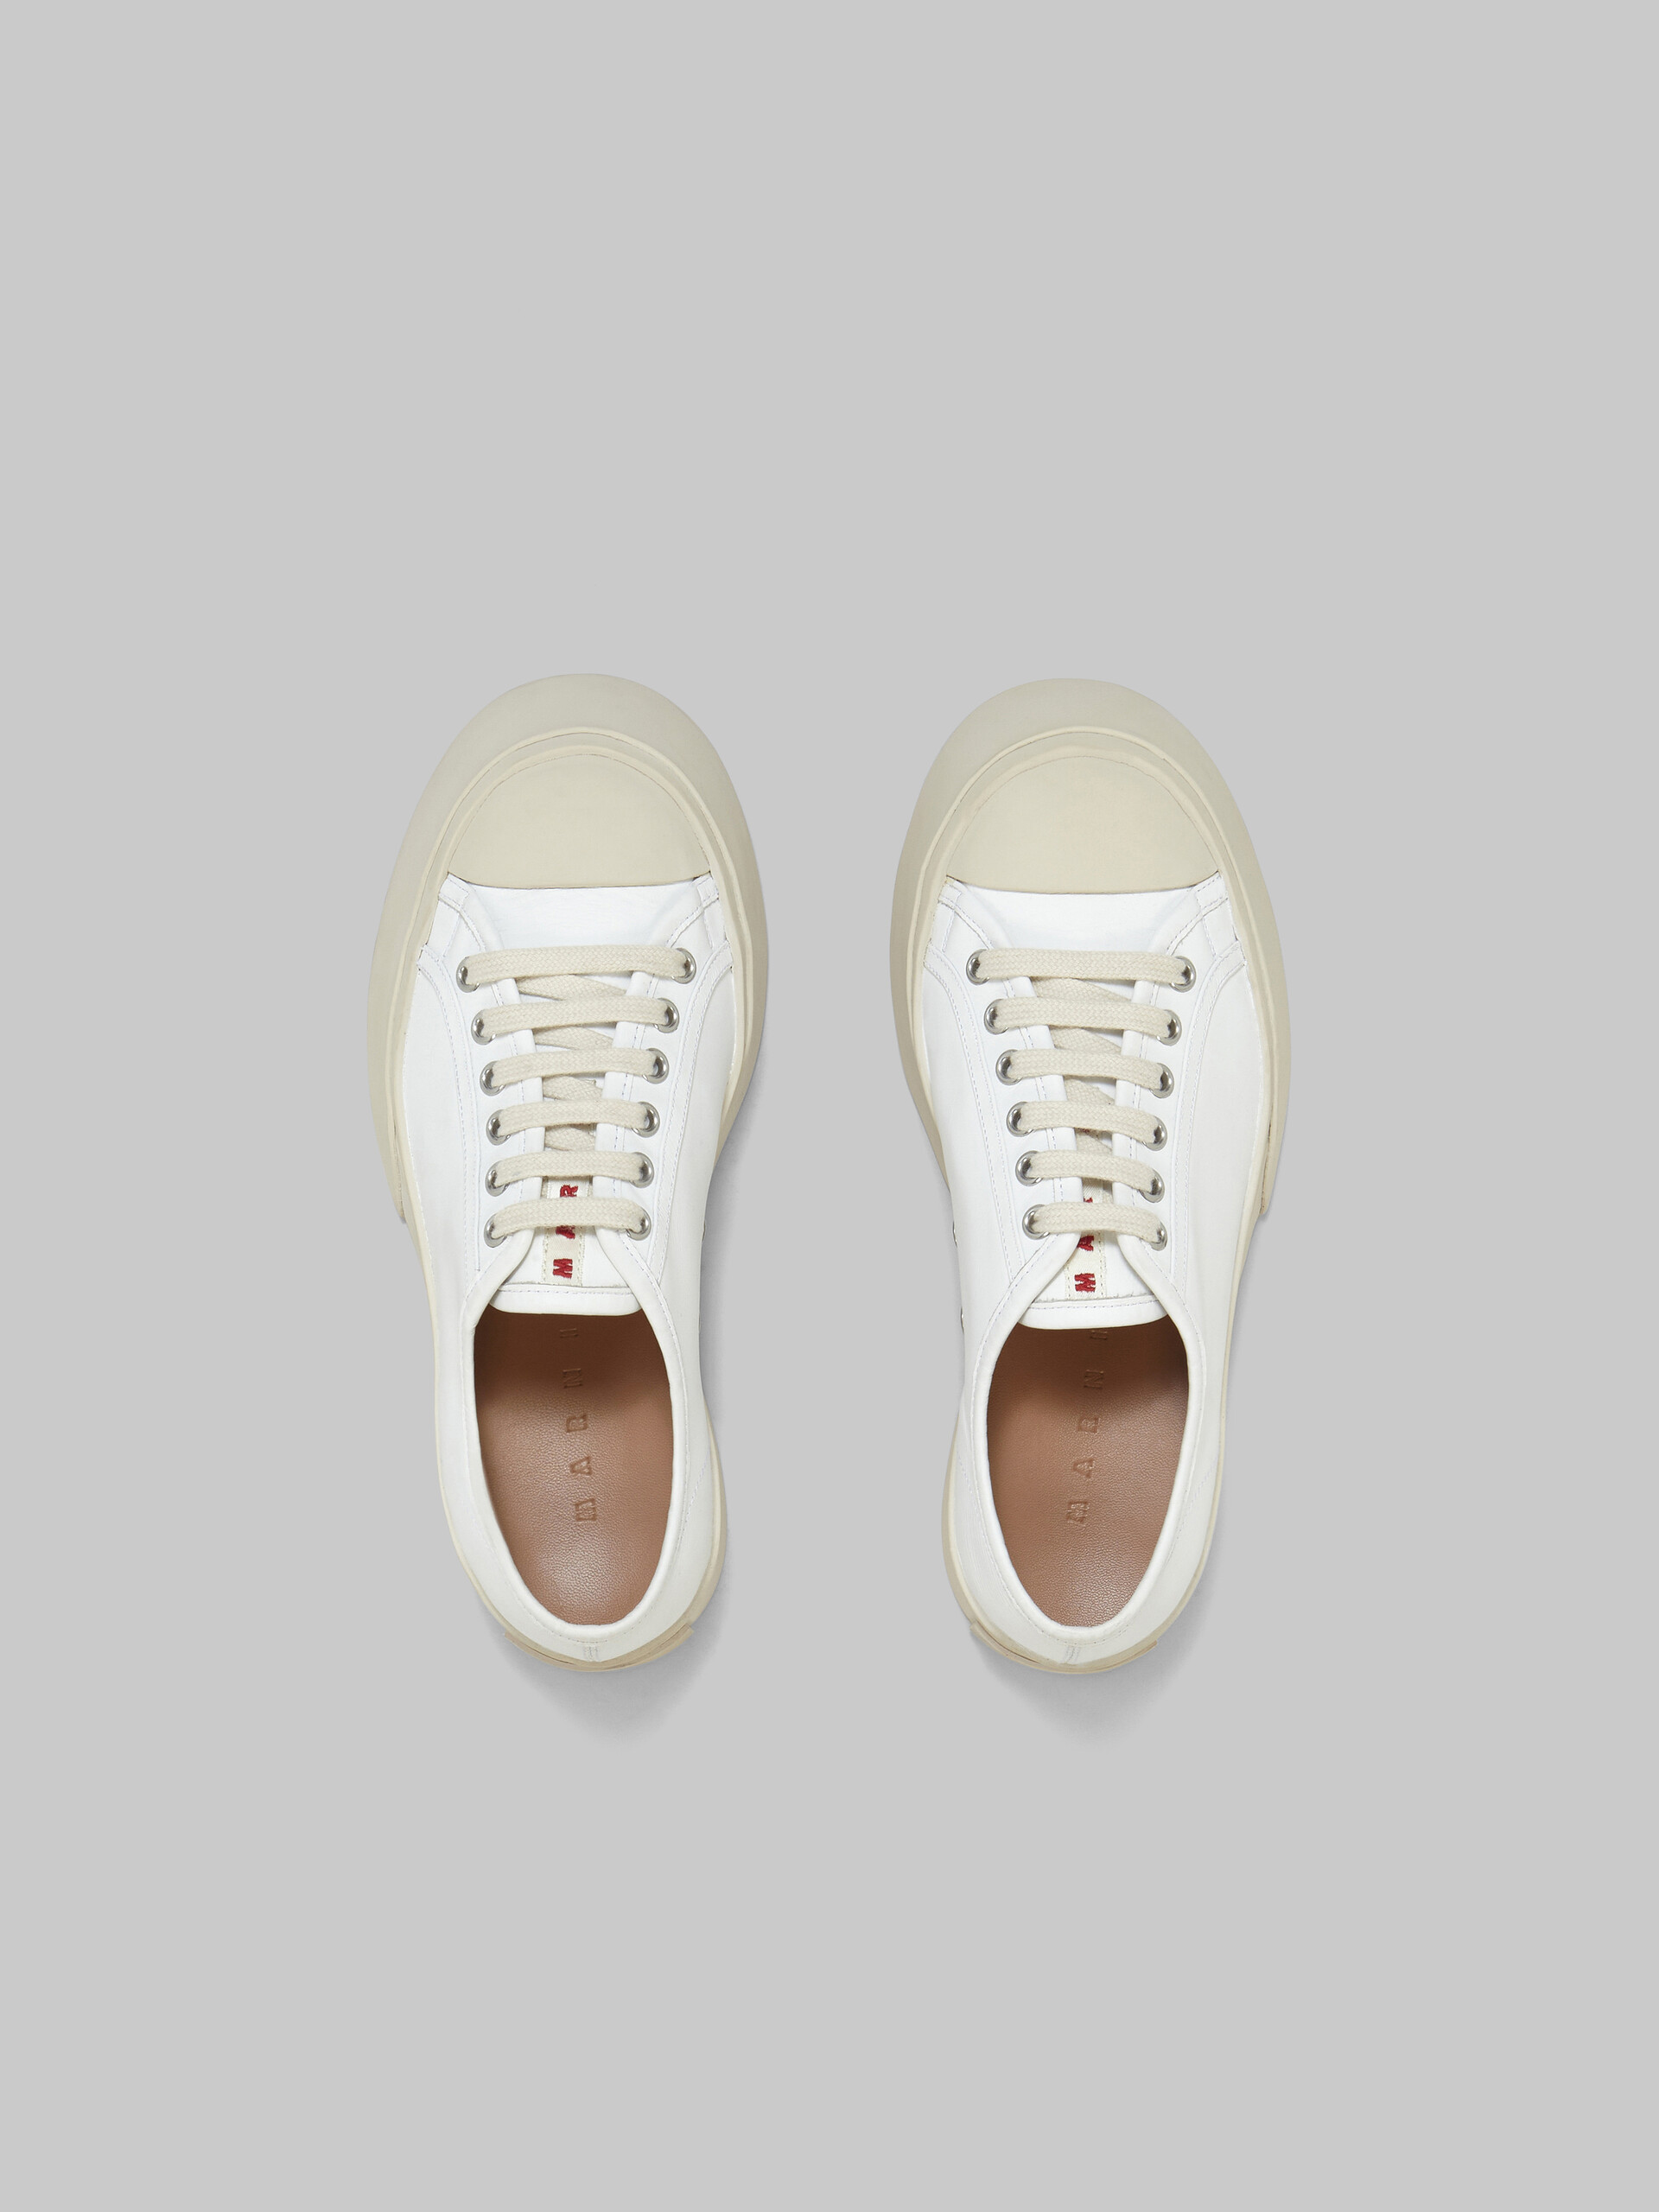 White nappa leather Pablo lace-up sneaker - Sneakers - Image 4